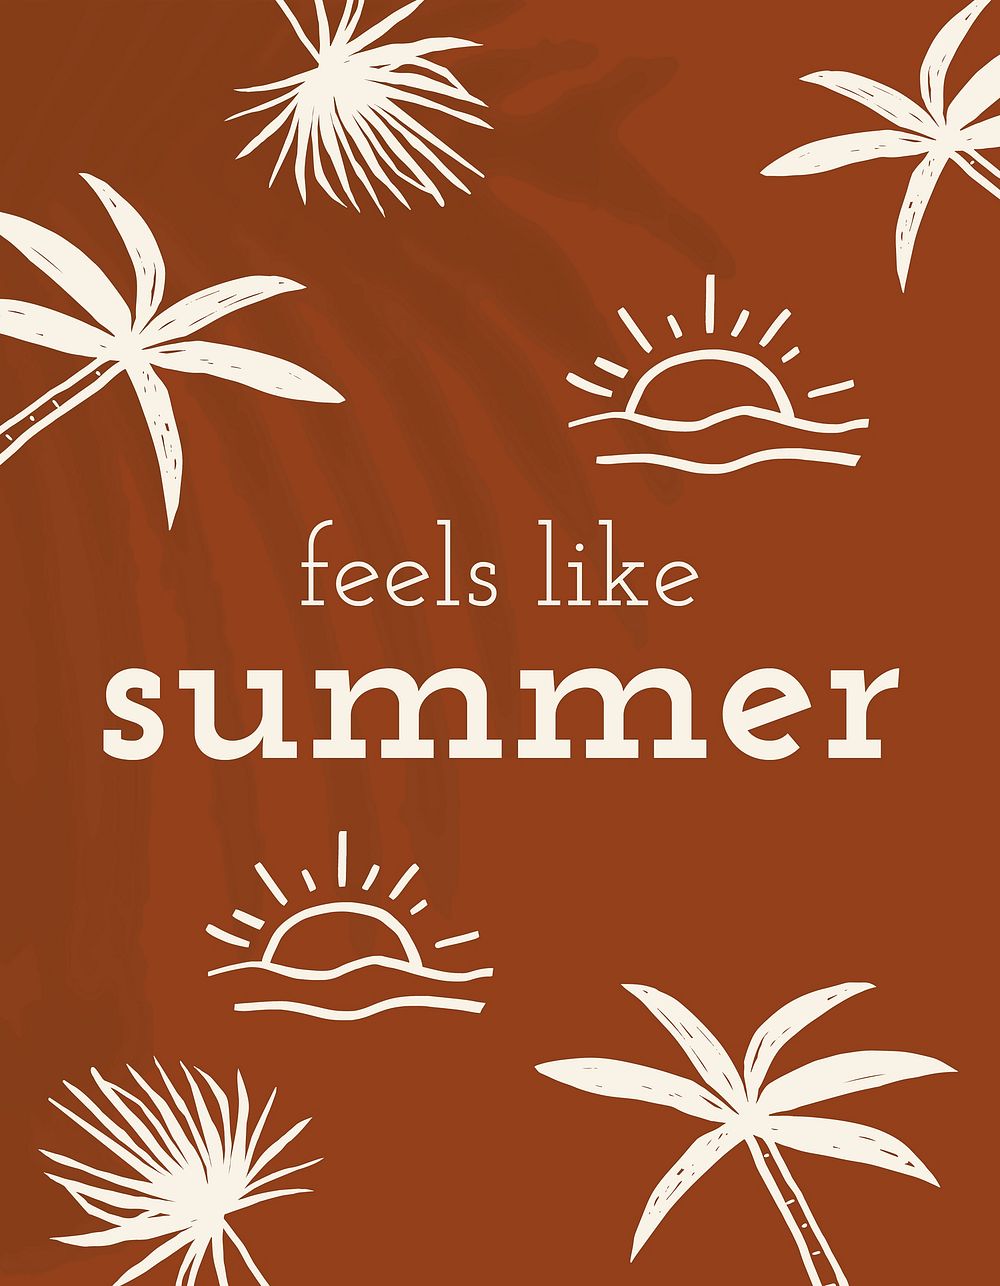 Summer doodle template vector feels like summer quote social media banner